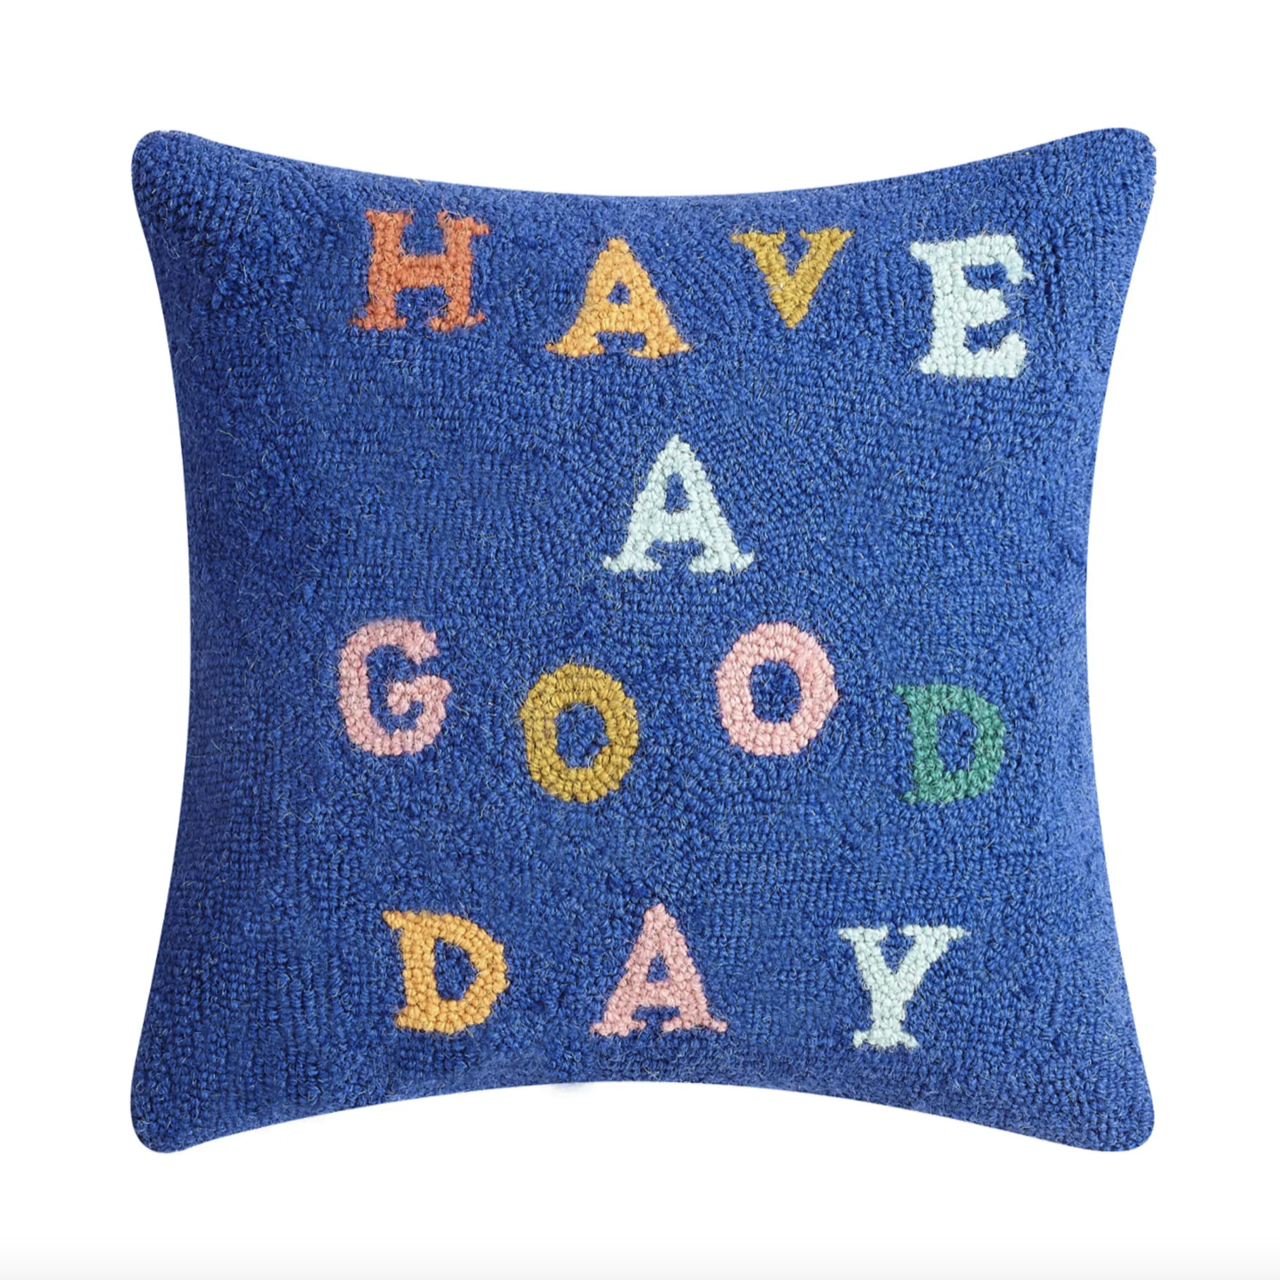 PH Have A Good Day Pillow